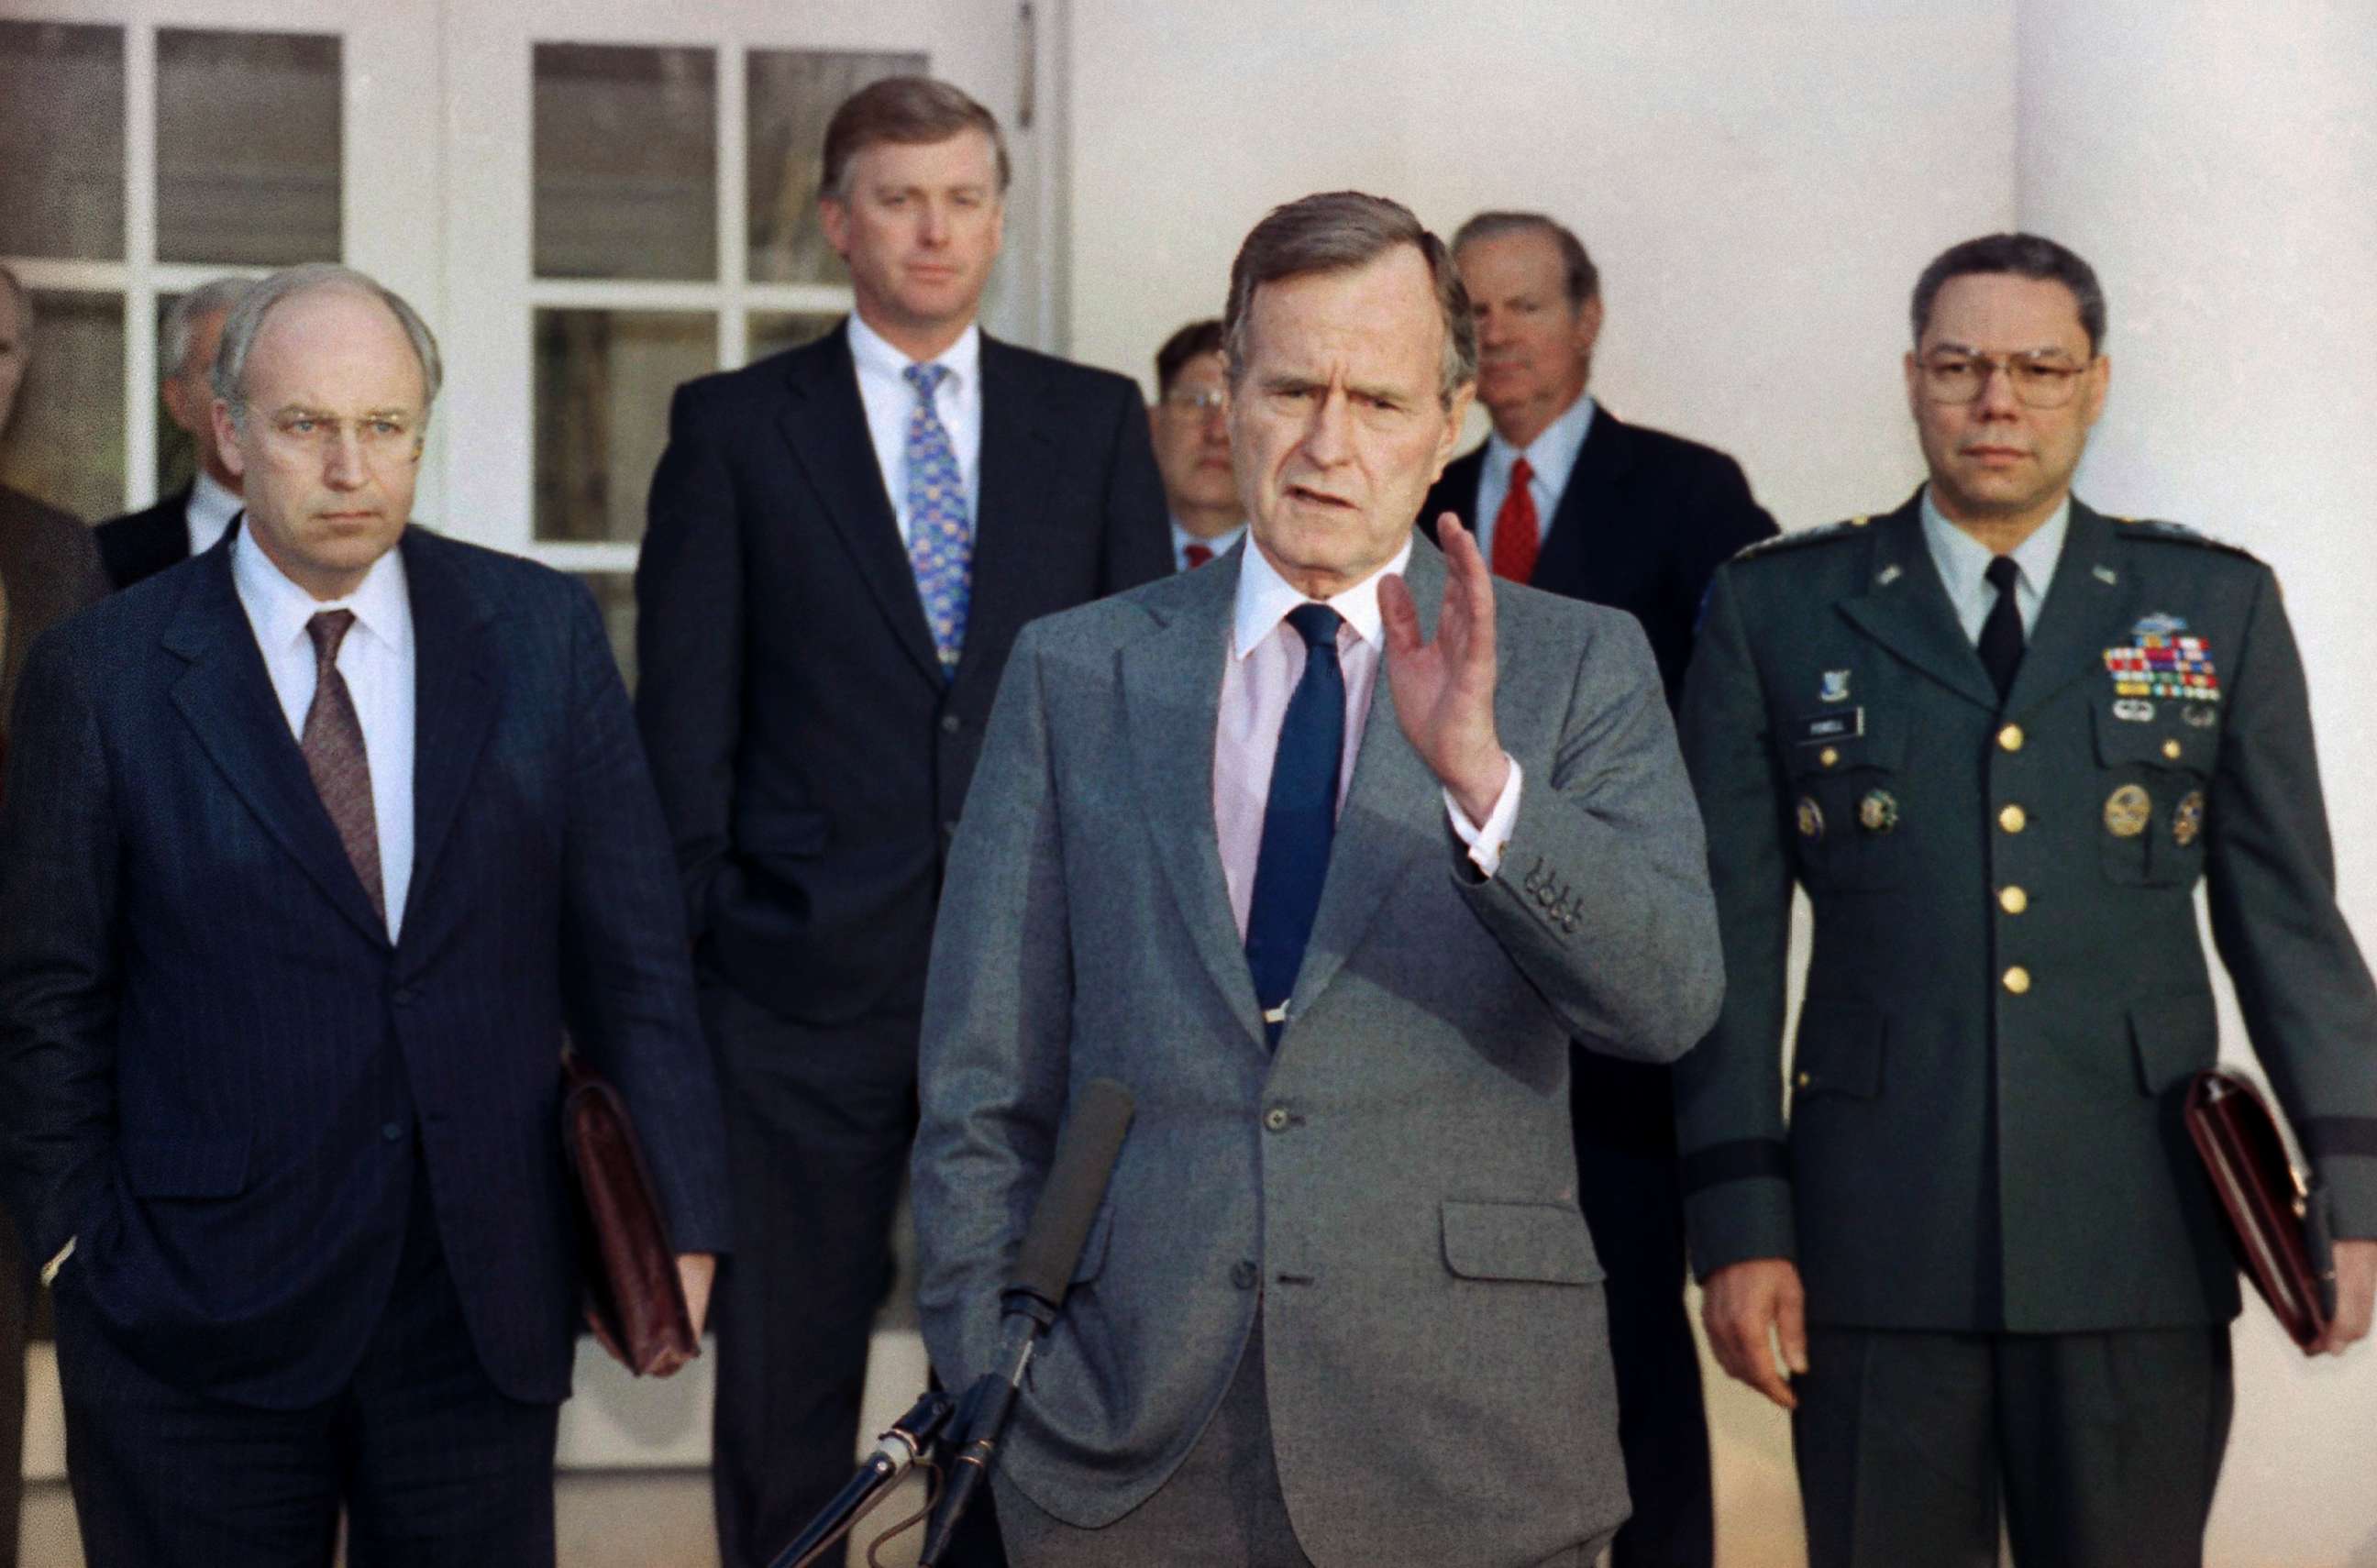 PHOTO: President George H.W. Bush talks to reporters in the Rose Garden of the White House after a meeting to discuss the Persian Gulf War. From left, Dick Cheney, Dan Quayle, John Sununu, the president, James A. Baker III, and Gen. Colin Powell.